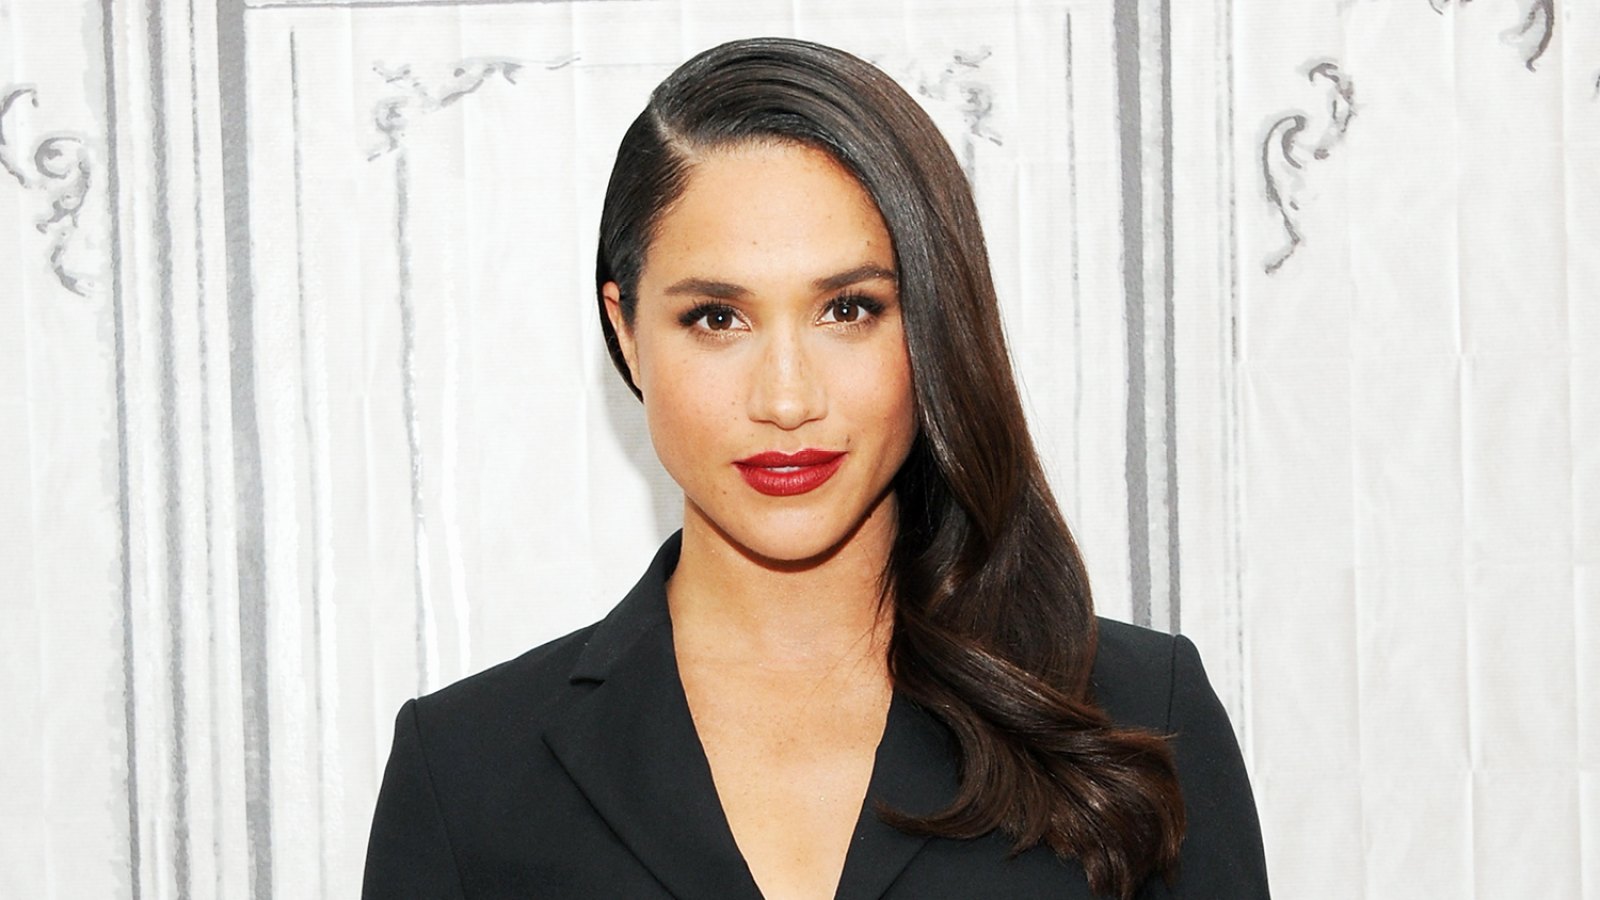 Meghan Markle discusses her role in "Suits" during AOL Build at AOL Studios In New York on March 17, 2016 in New York City.